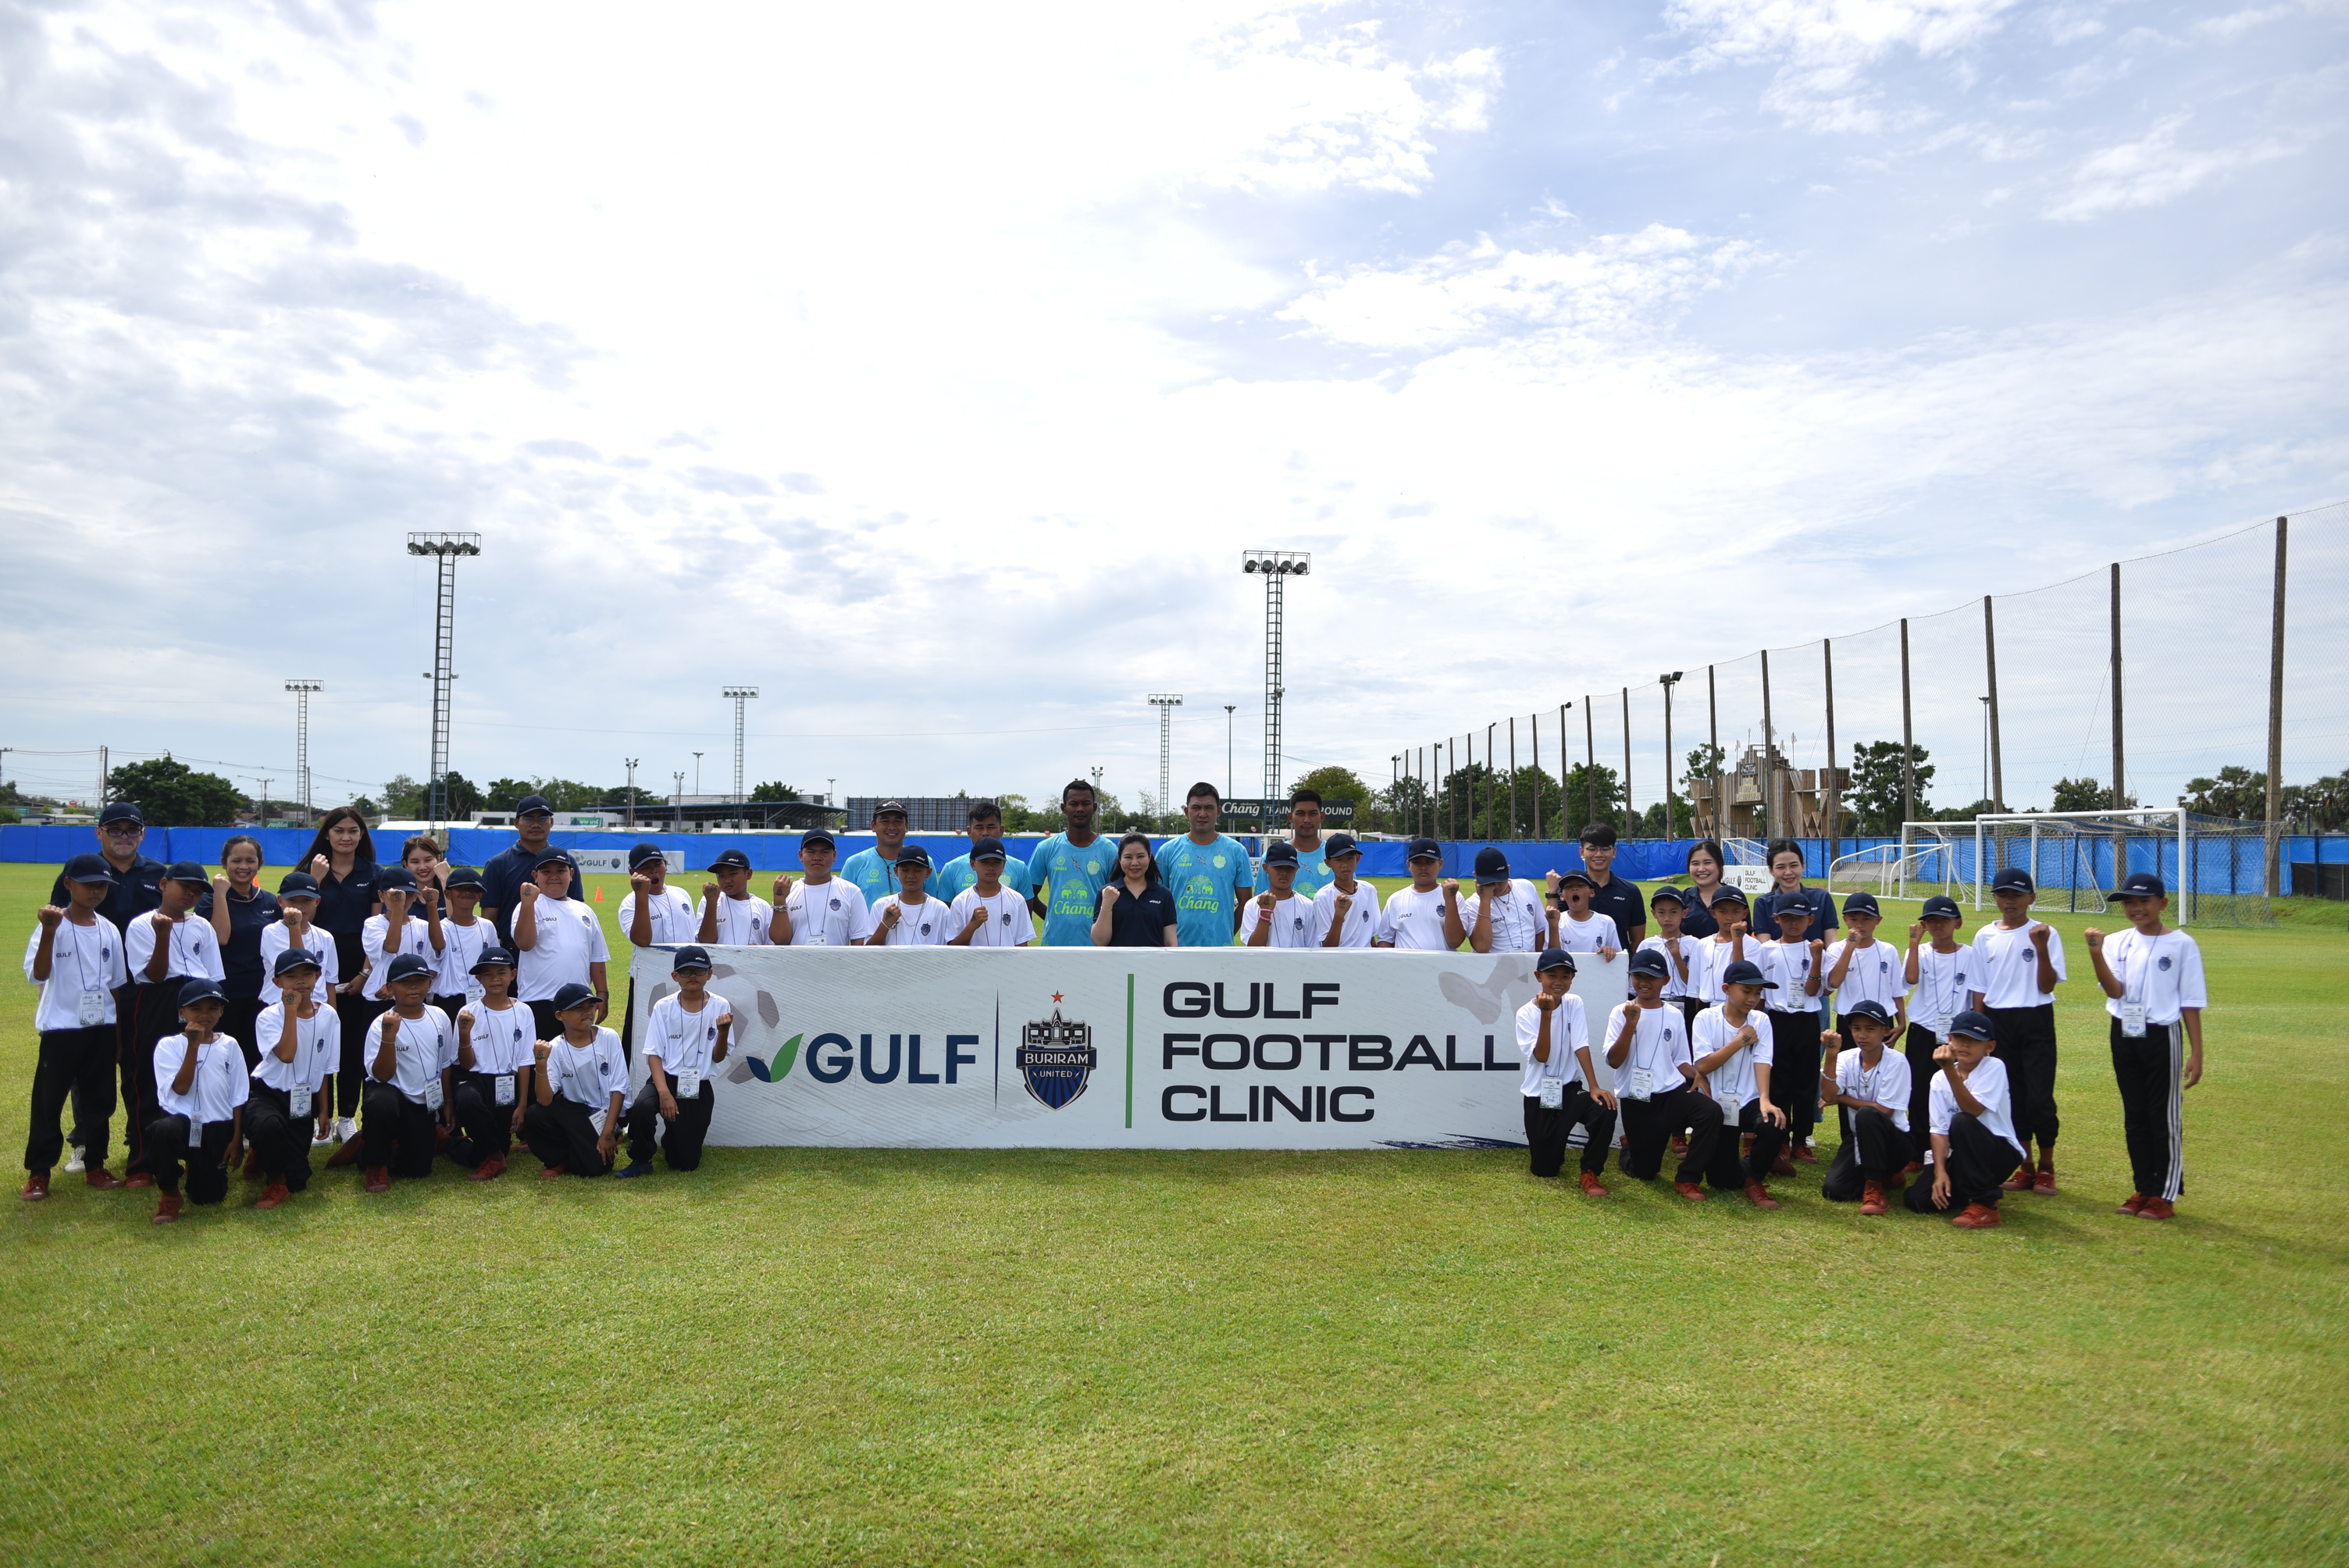 GULF and Buriram United spark young footballers’ dreams with 
“GULF Football Clinic” for the second year
